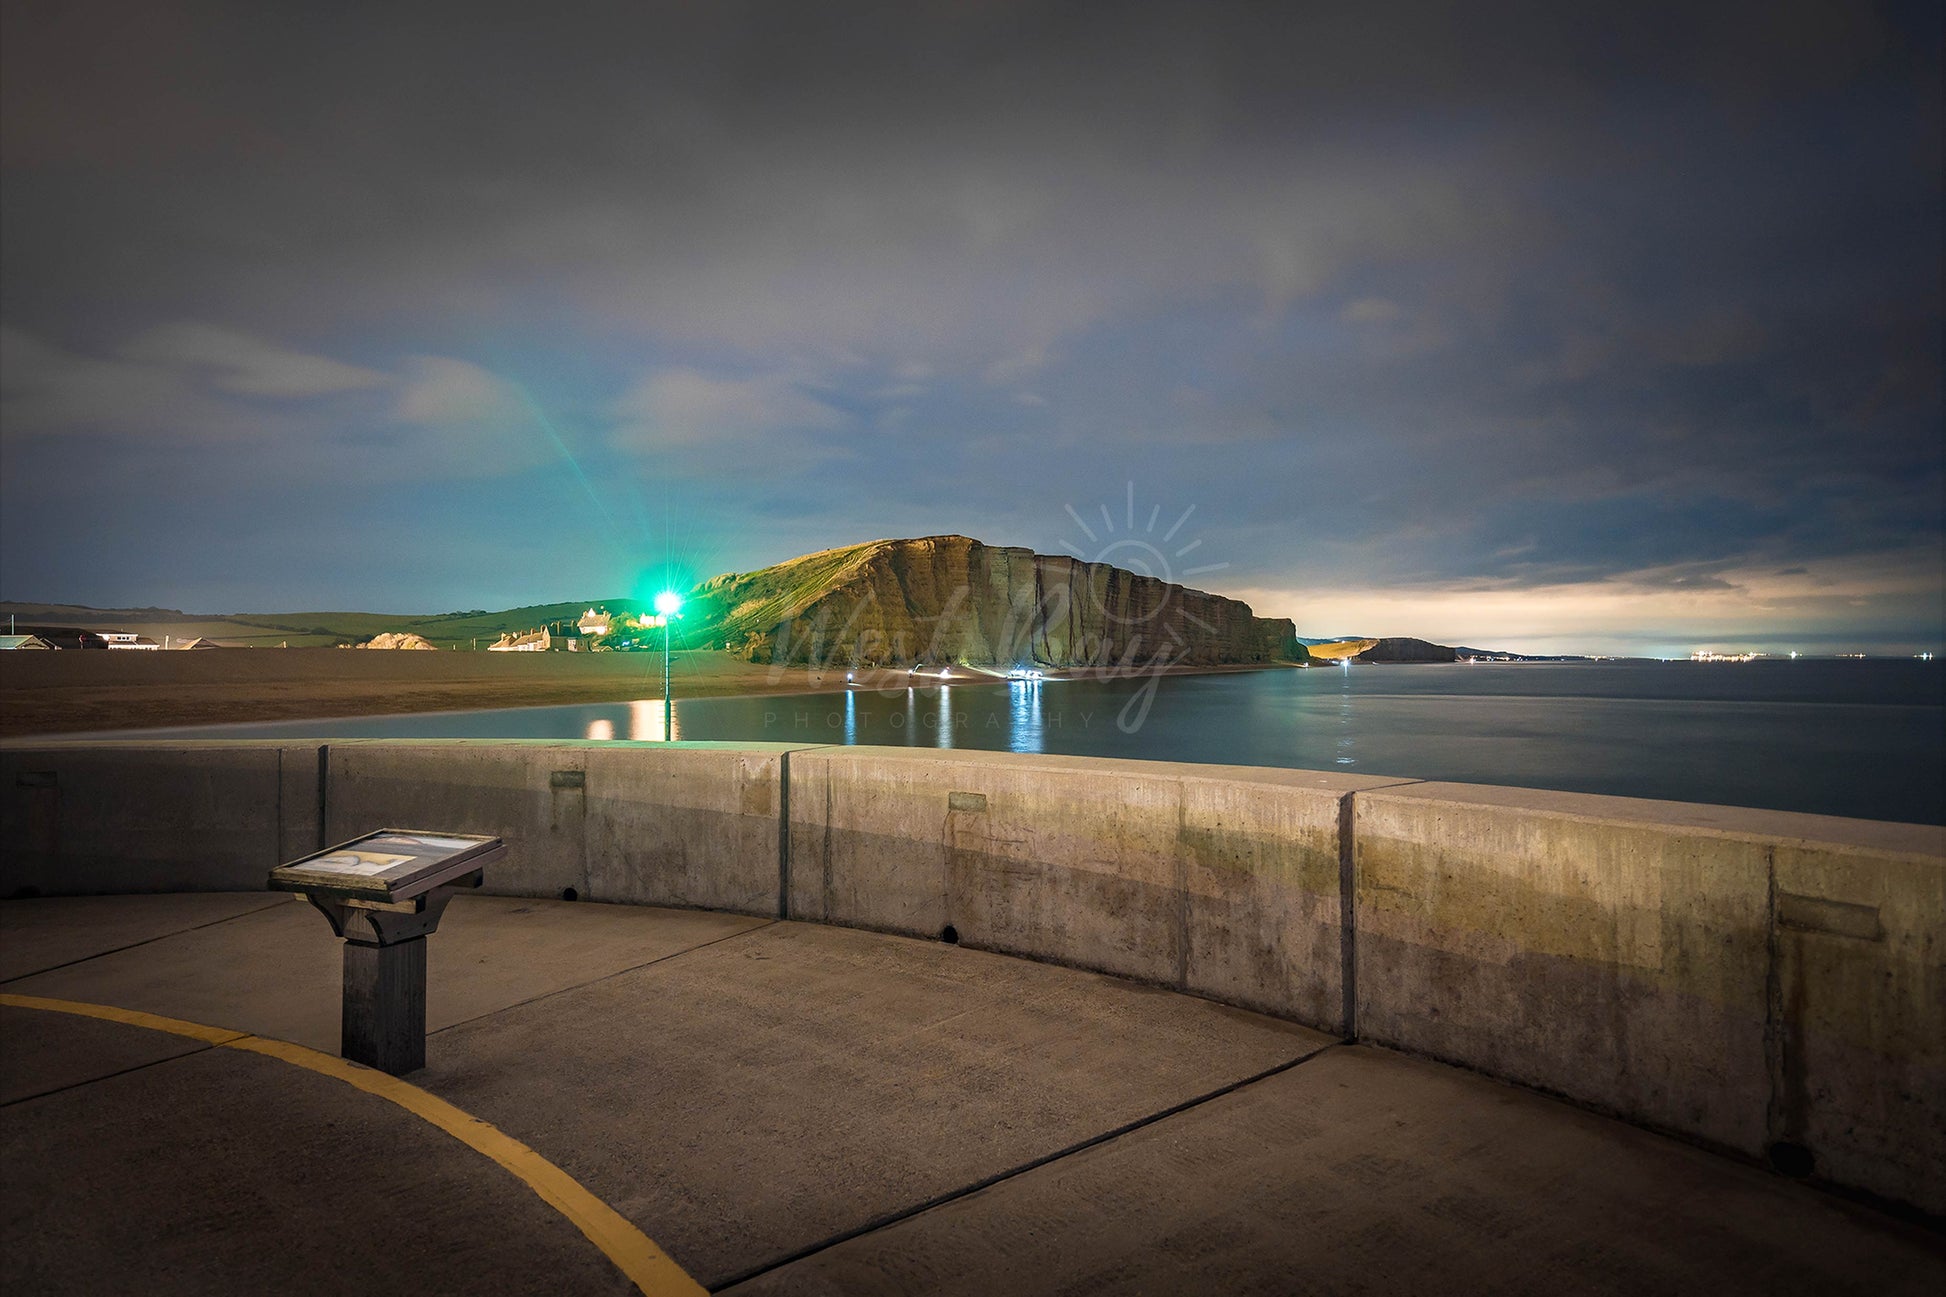 Nights On The Pier - West Bay - West Bay Photography